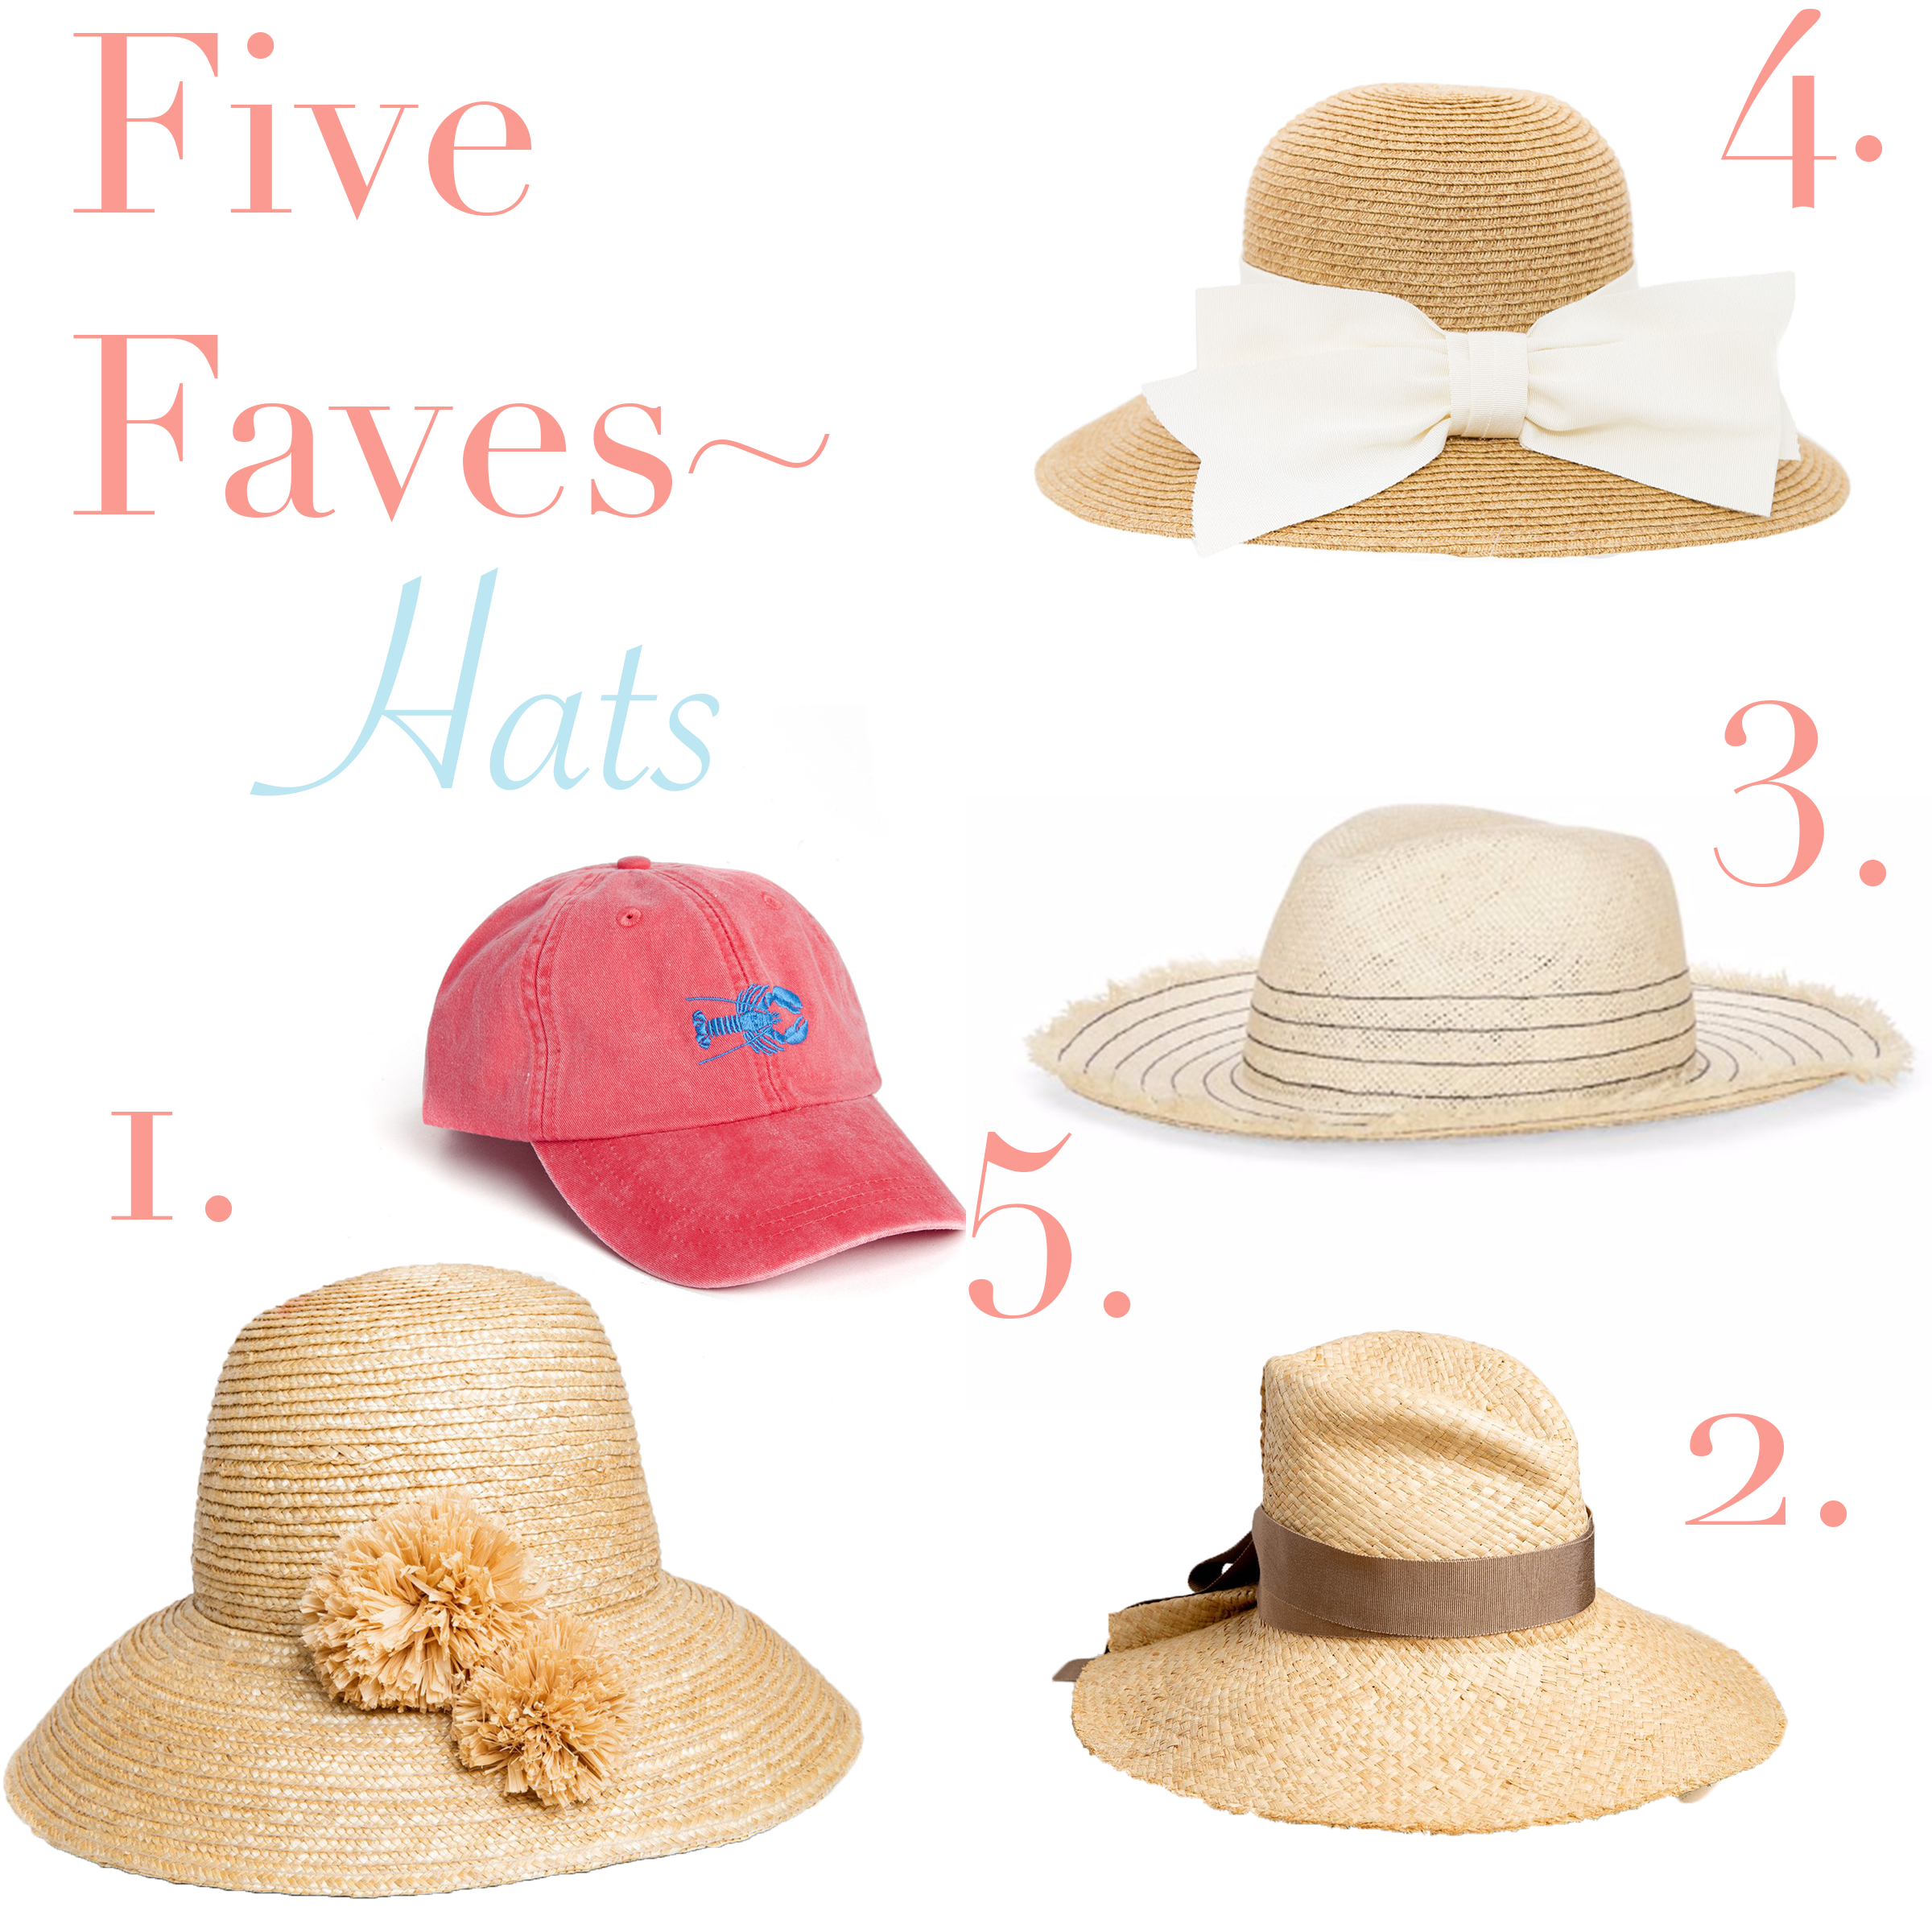 Five Faves~ Hats!